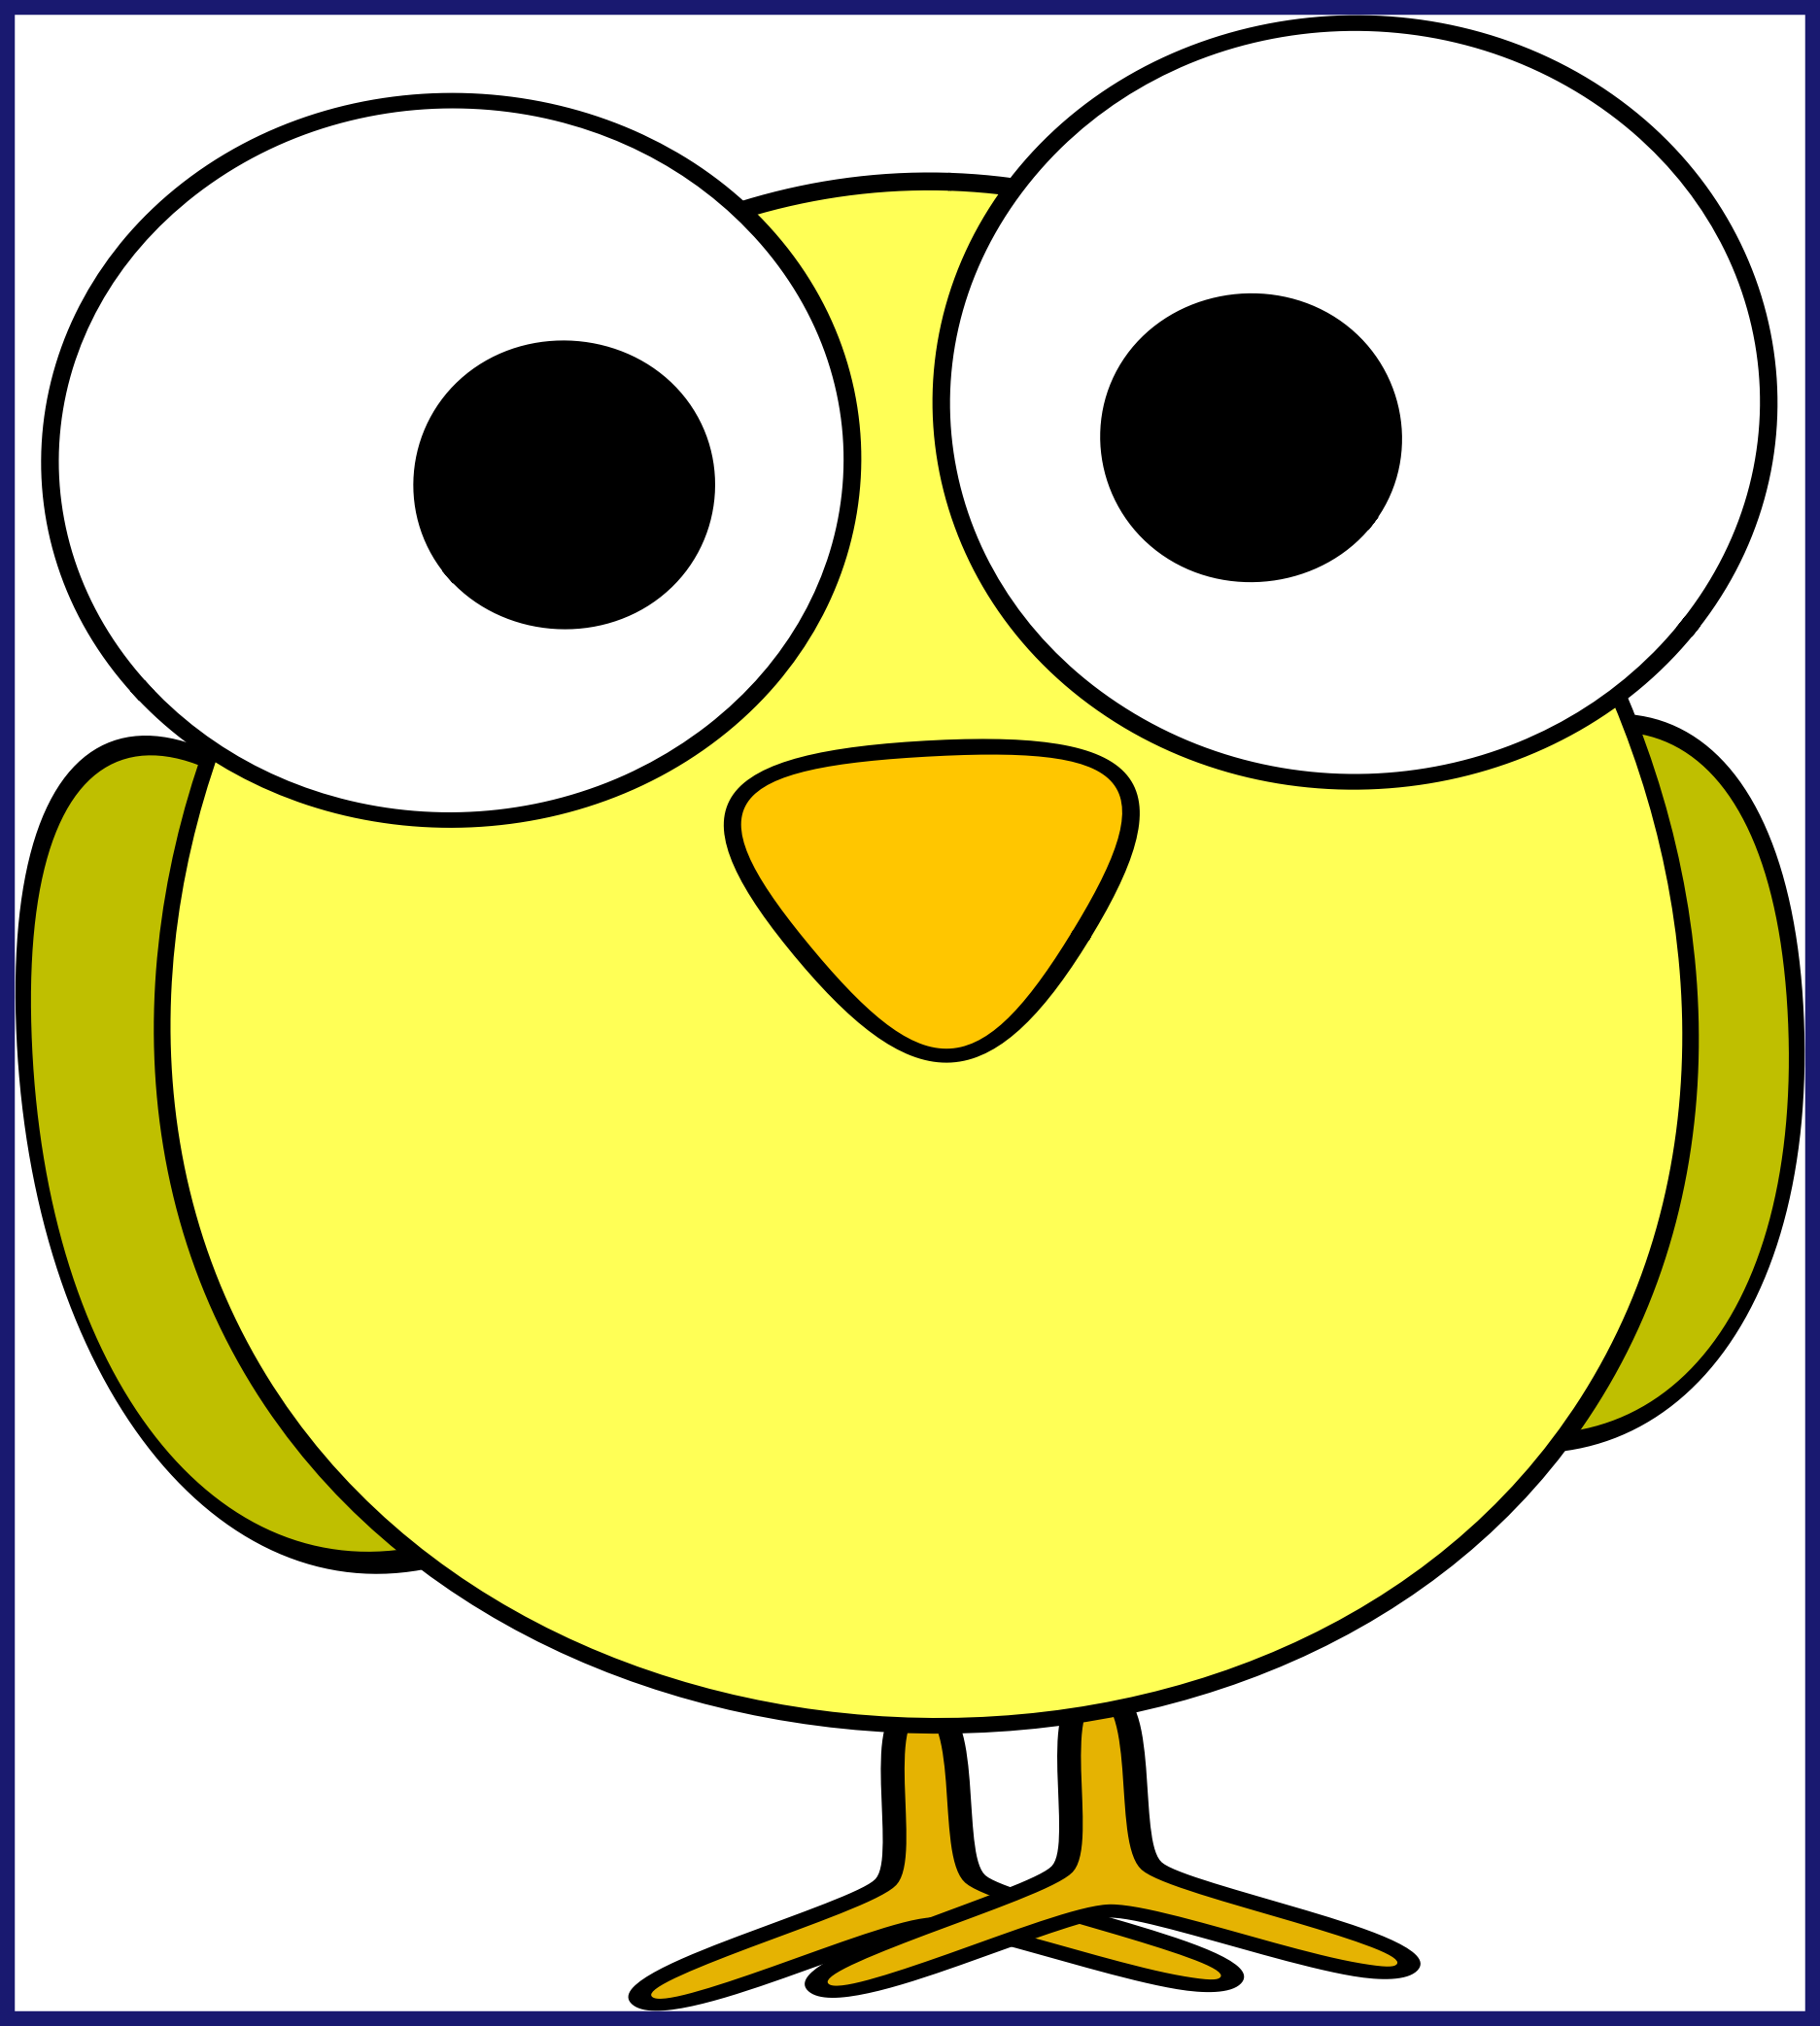 Marvelous A Funny Looking Yellow Cartoon Bird With - Yellow Bird Cartoon -  (1873x2085) Png Clipart Download